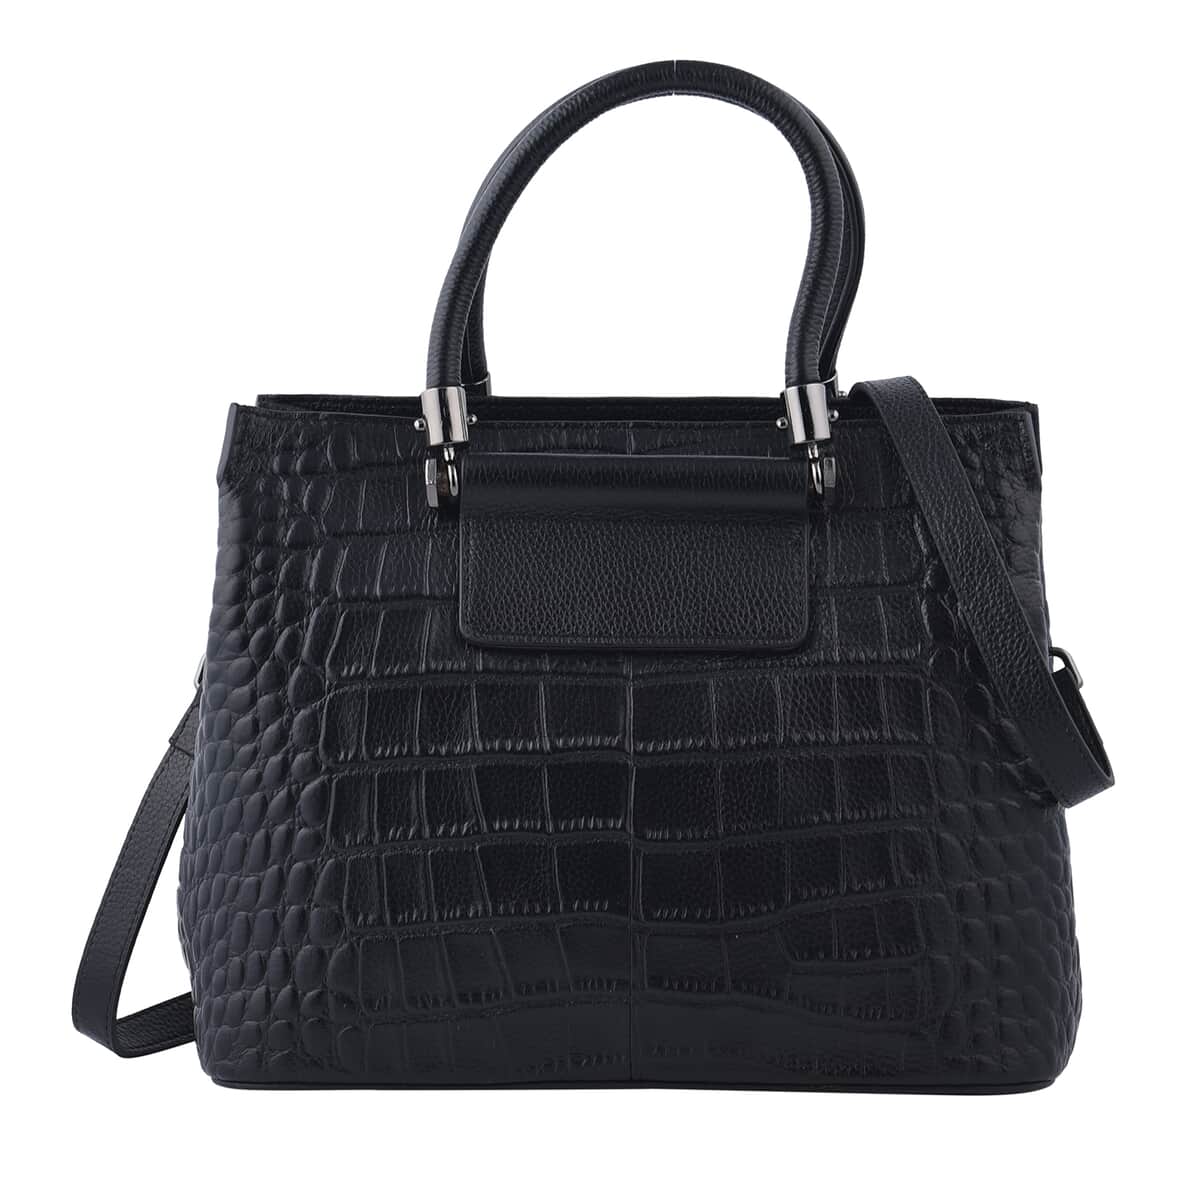 Black Crocodile Embossed Pattern Genuine Leather Convertible Bag (11.42"x4.33"x9.06") with Handle and Shoulder Straps image number 0